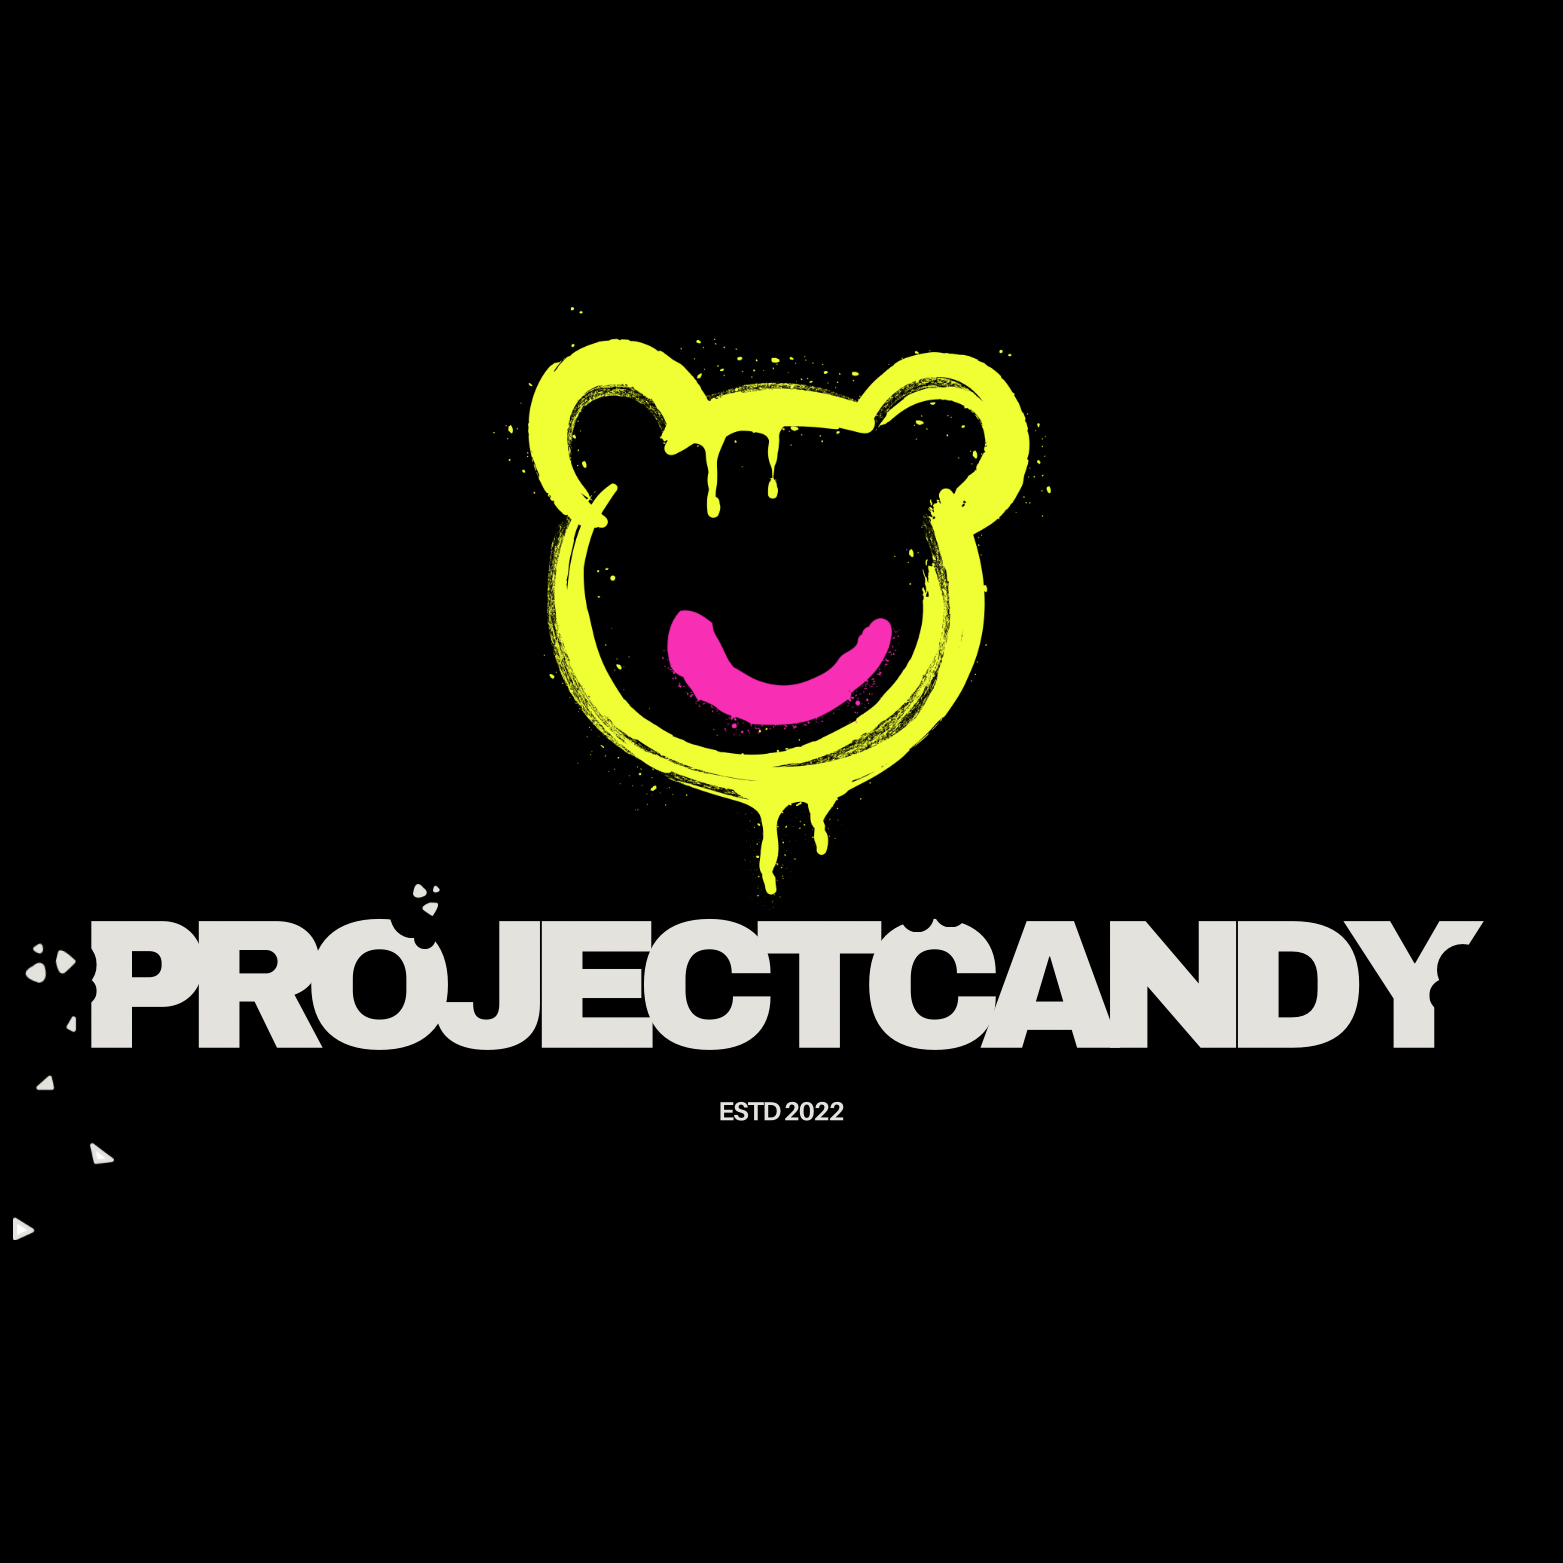 PROJECT CANDY